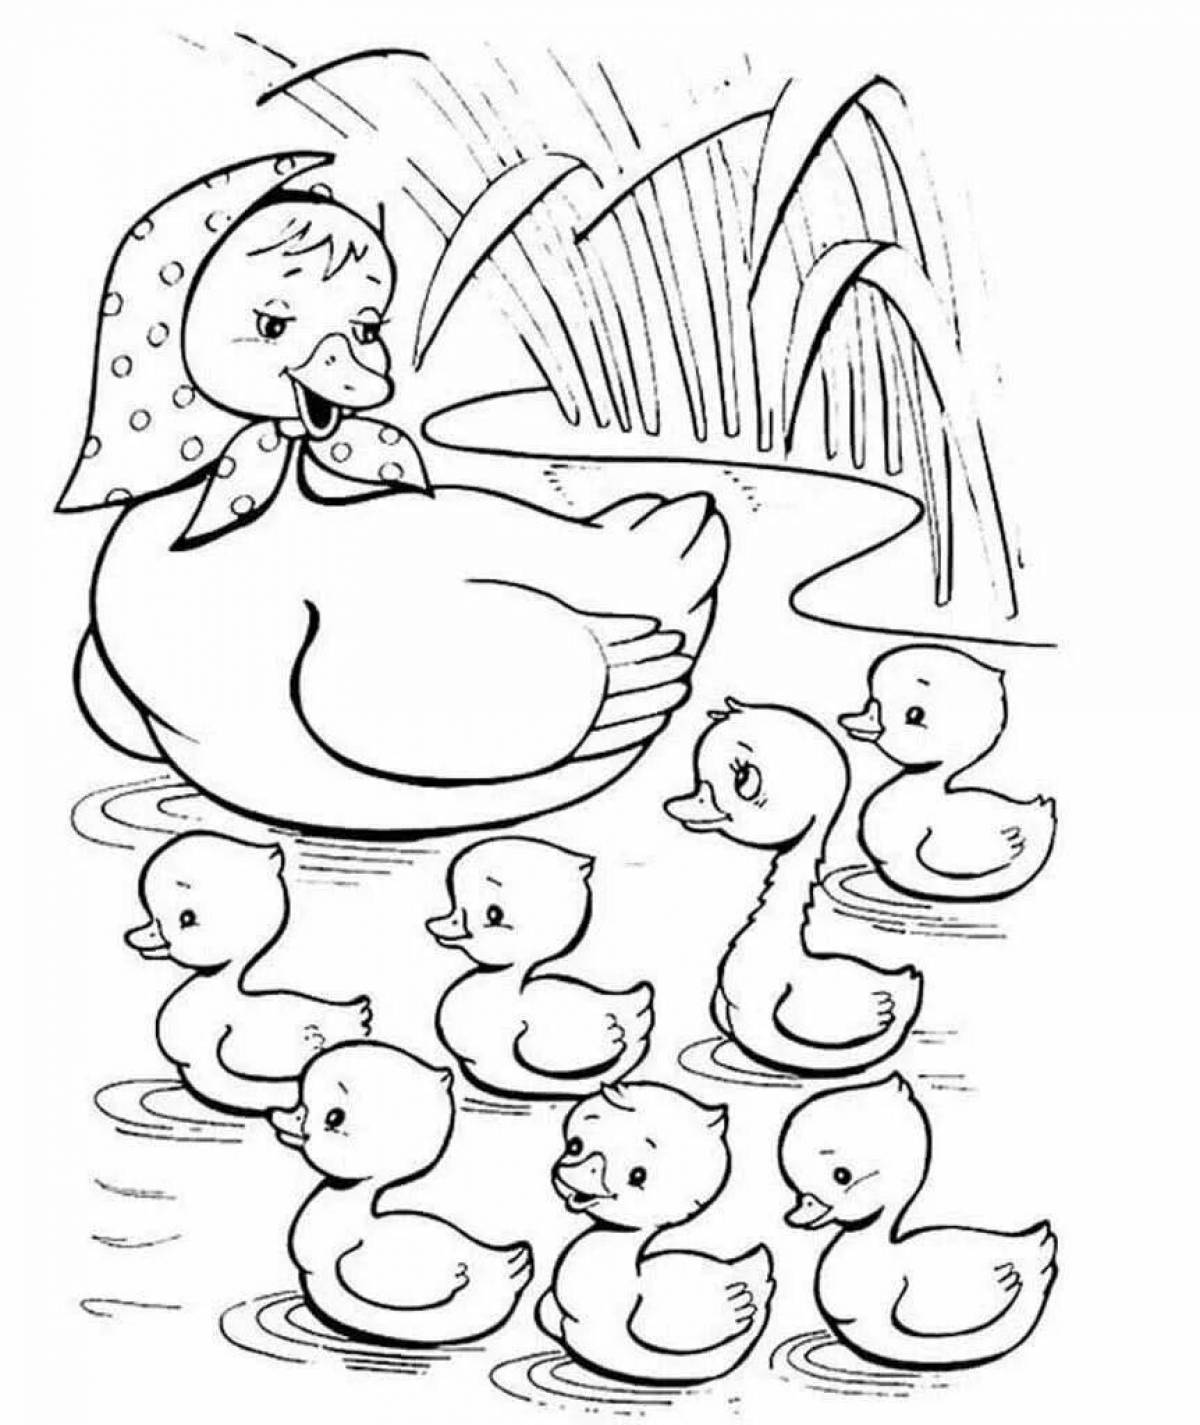 Animated ugly duckling coloring book for kids